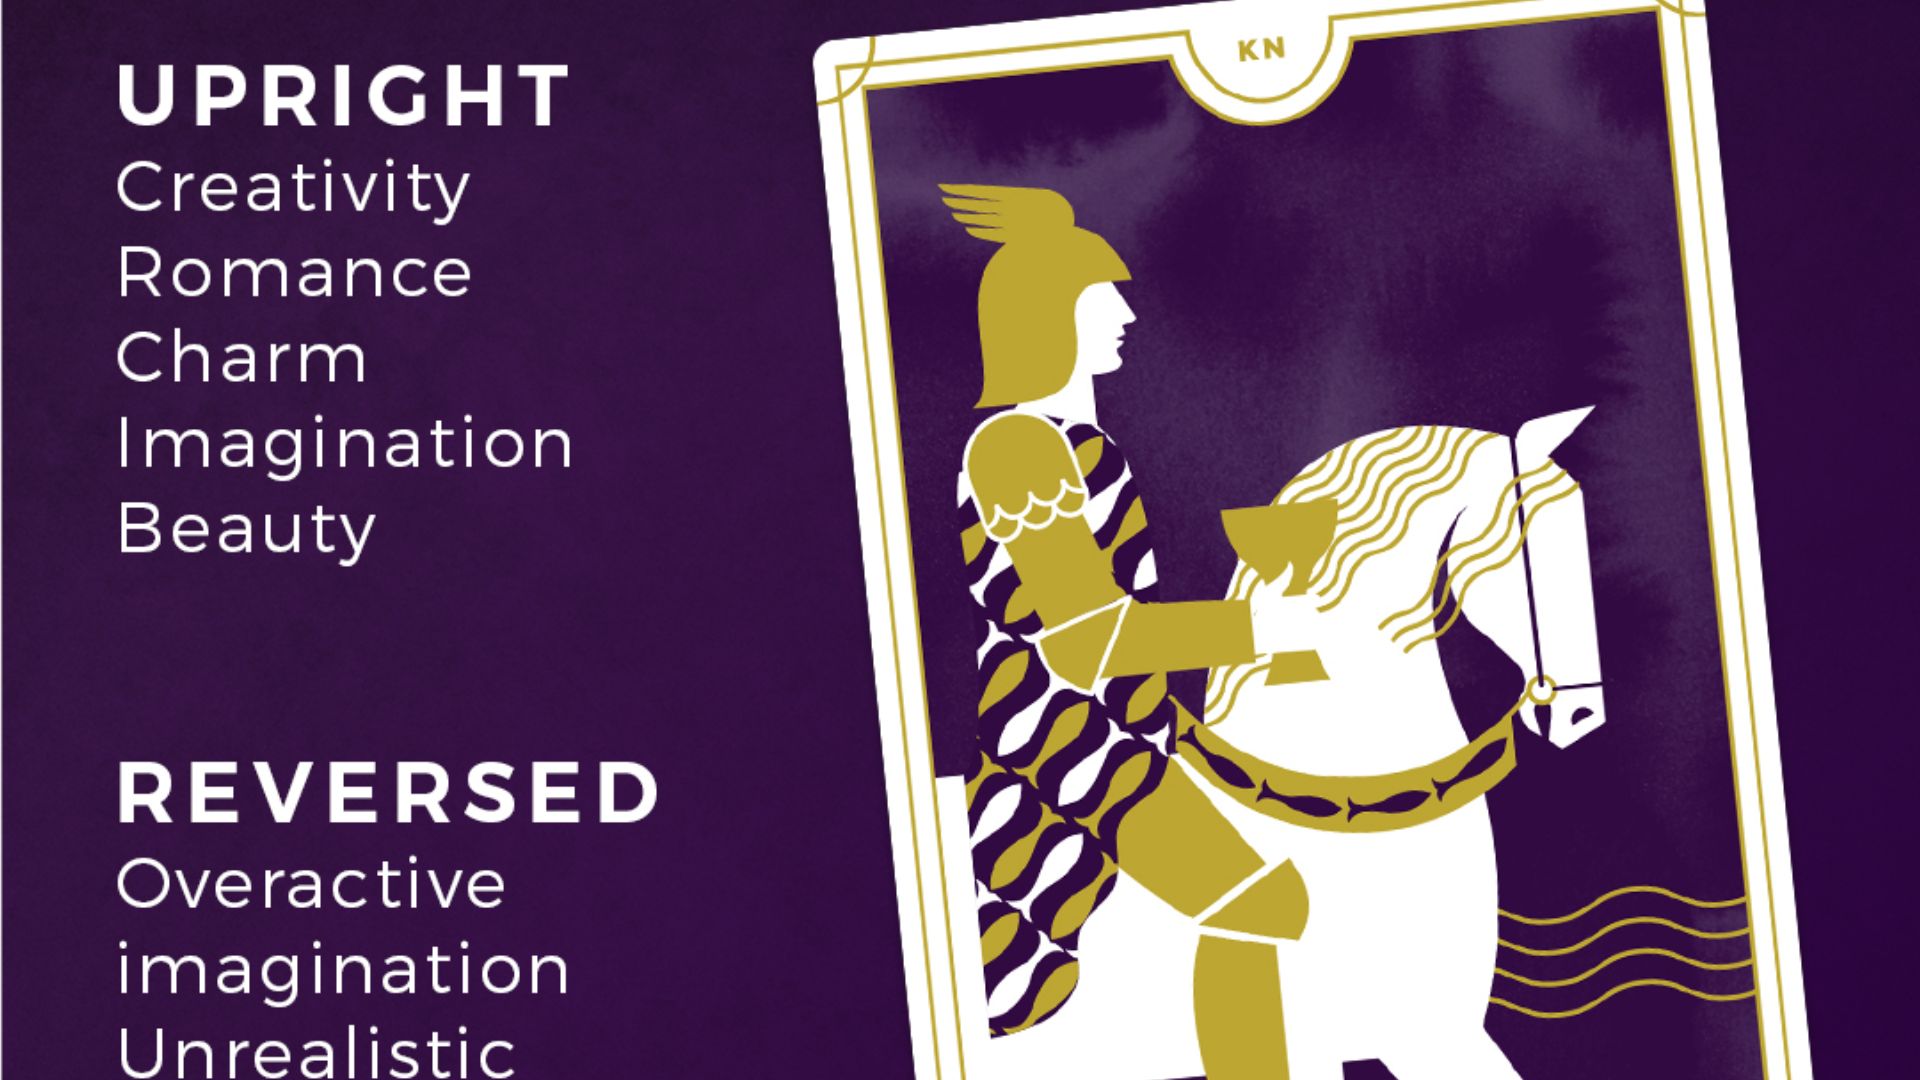 Knight of Cup Tarot Card And Its Description